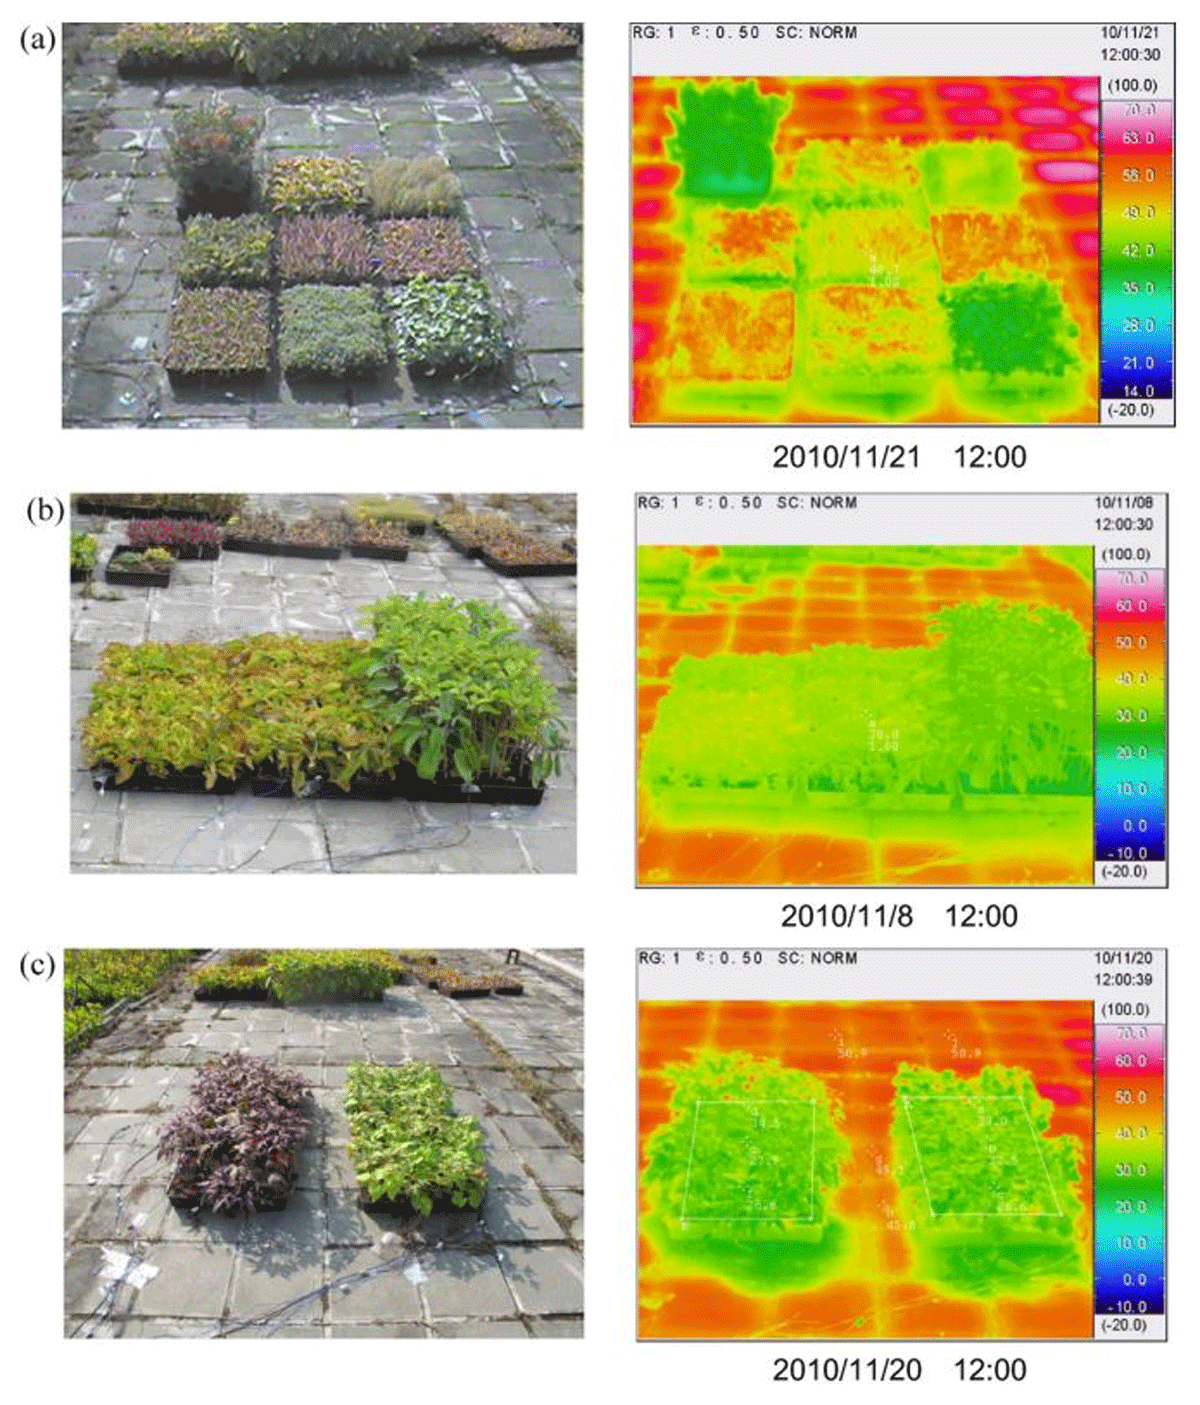 Thermal effect analysis of various plants using thermography by Liu et al., 2019